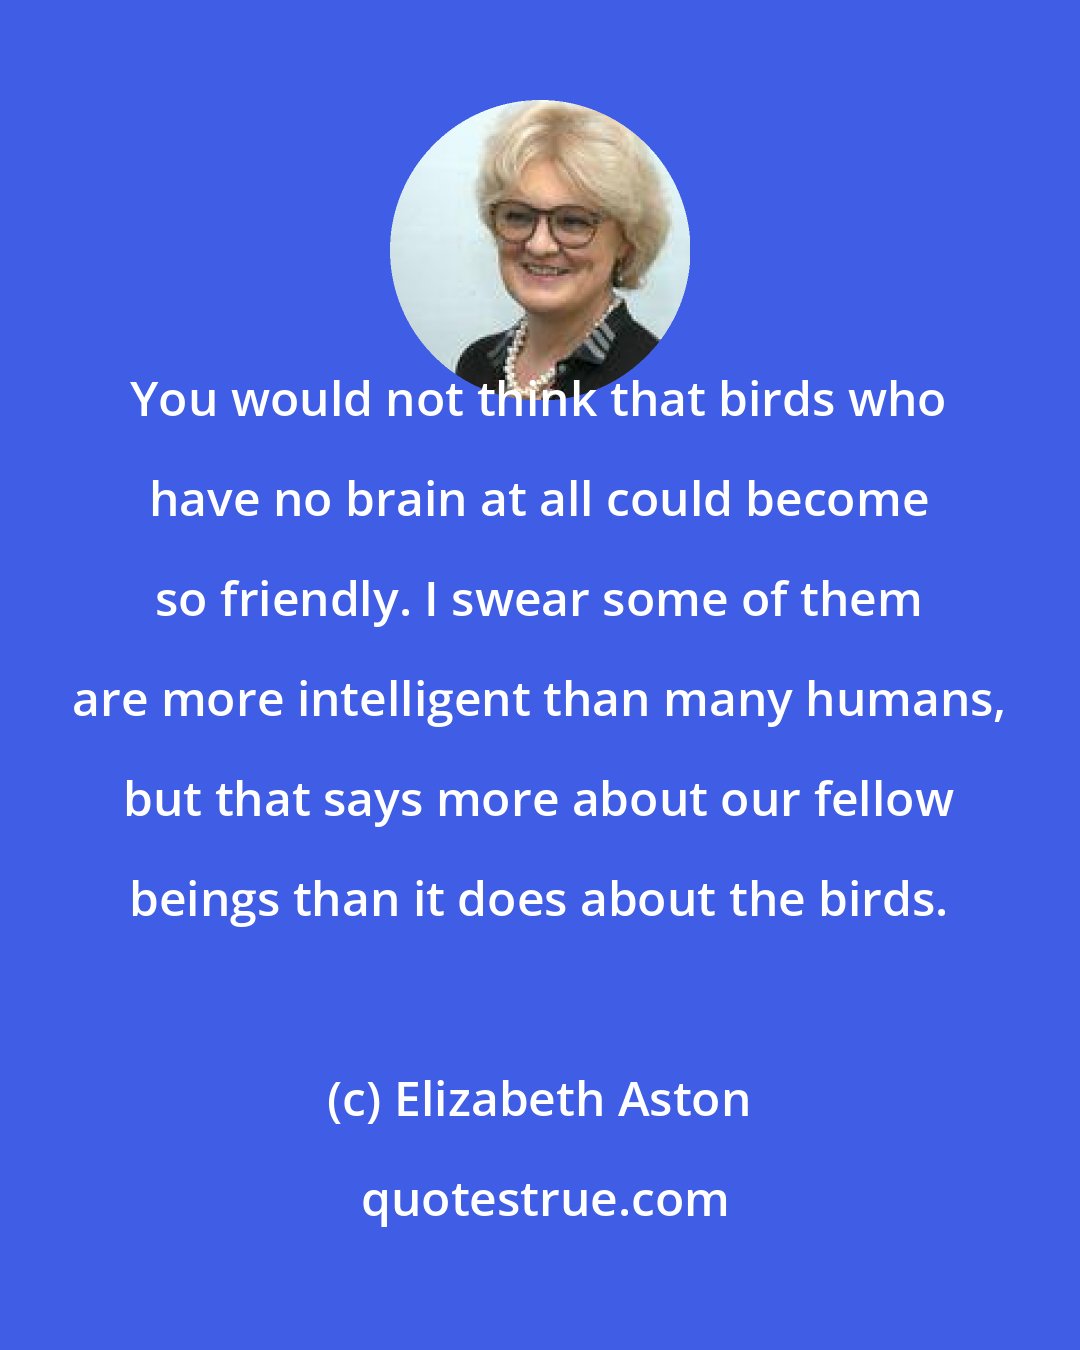 Elizabeth Aston: You would not think that birds who have no brain at all could become so friendly. I swear some of them are more intelligent than many humans, but that says more about our fellow beings than it does about the birds.